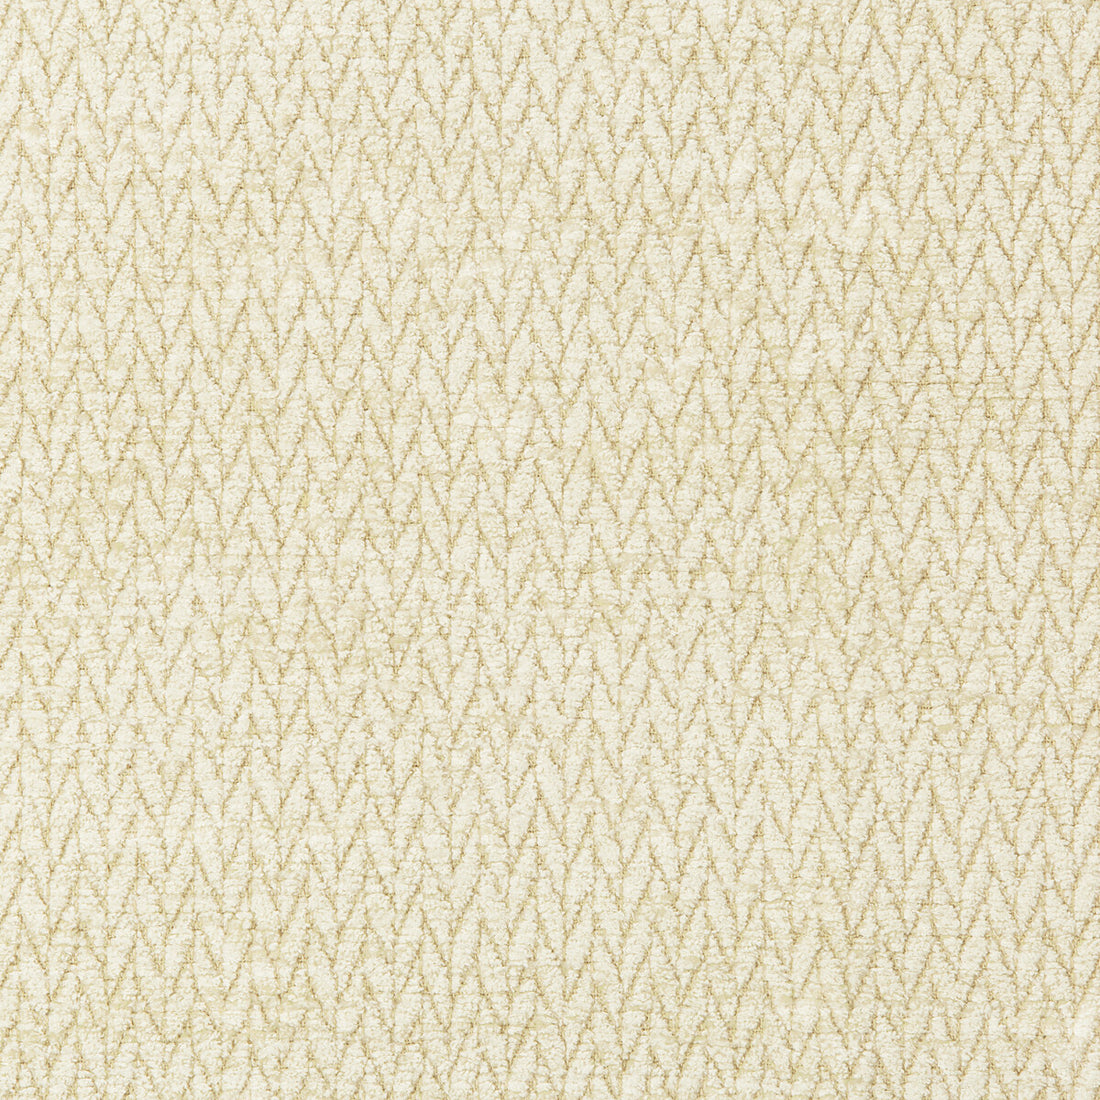 Cassien Texture fabric in sand color - pattern 8019146.16.0 - by Brunschwig &amp; Fils in the Chambery Textures II collection